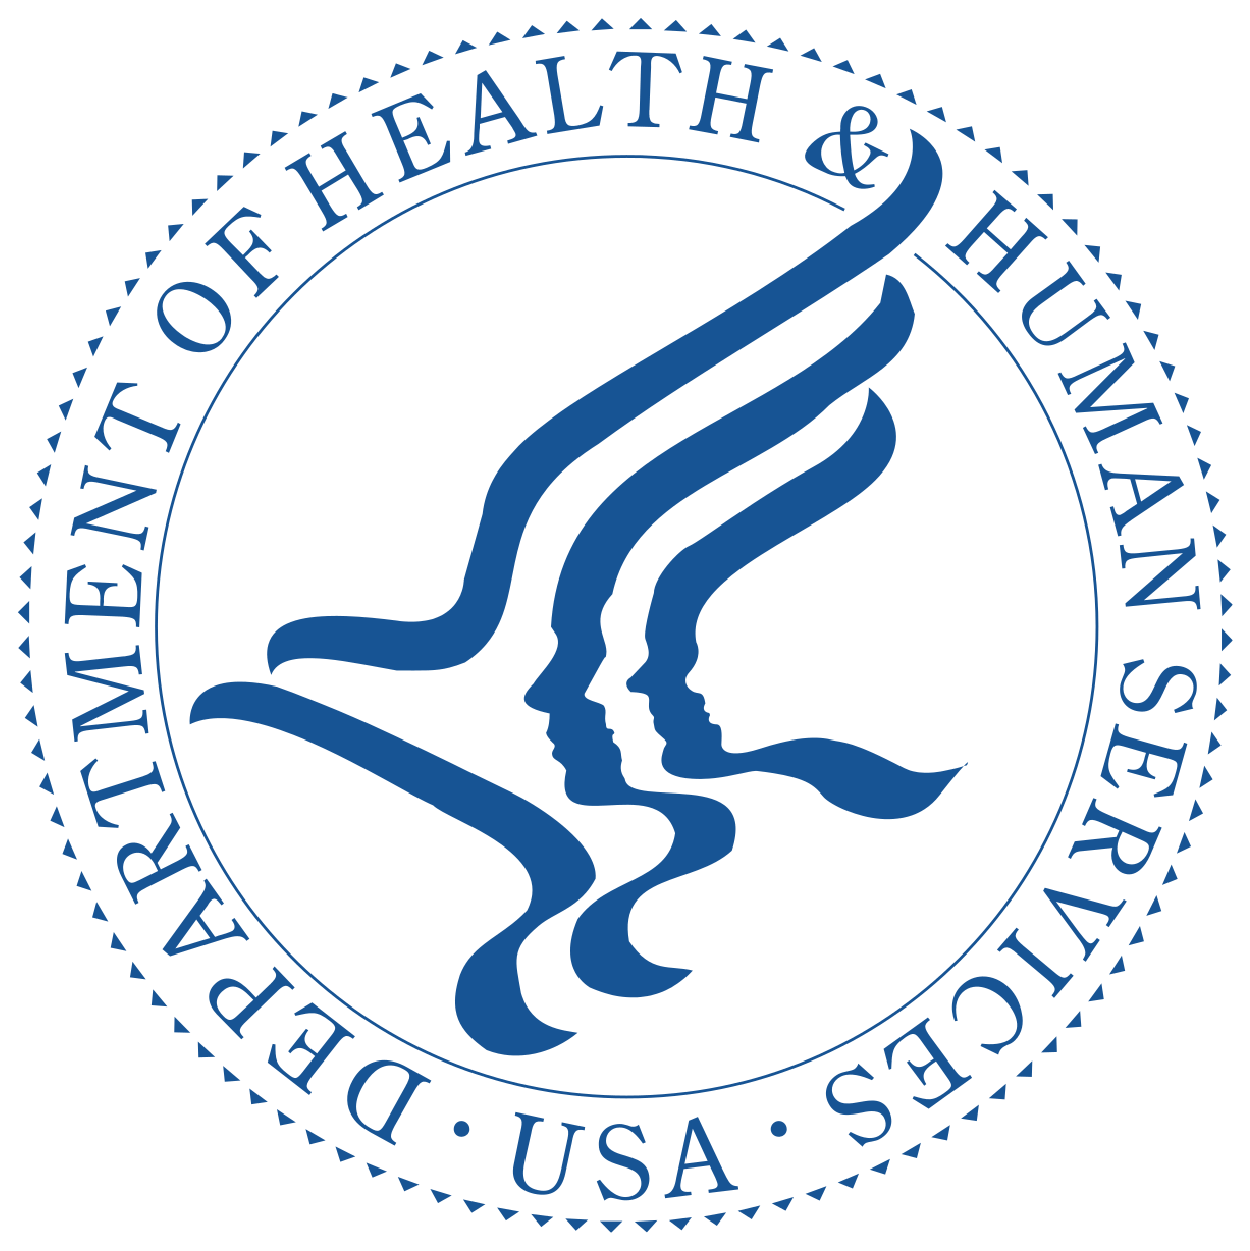 U.S. Department of Health and Human Services Seal